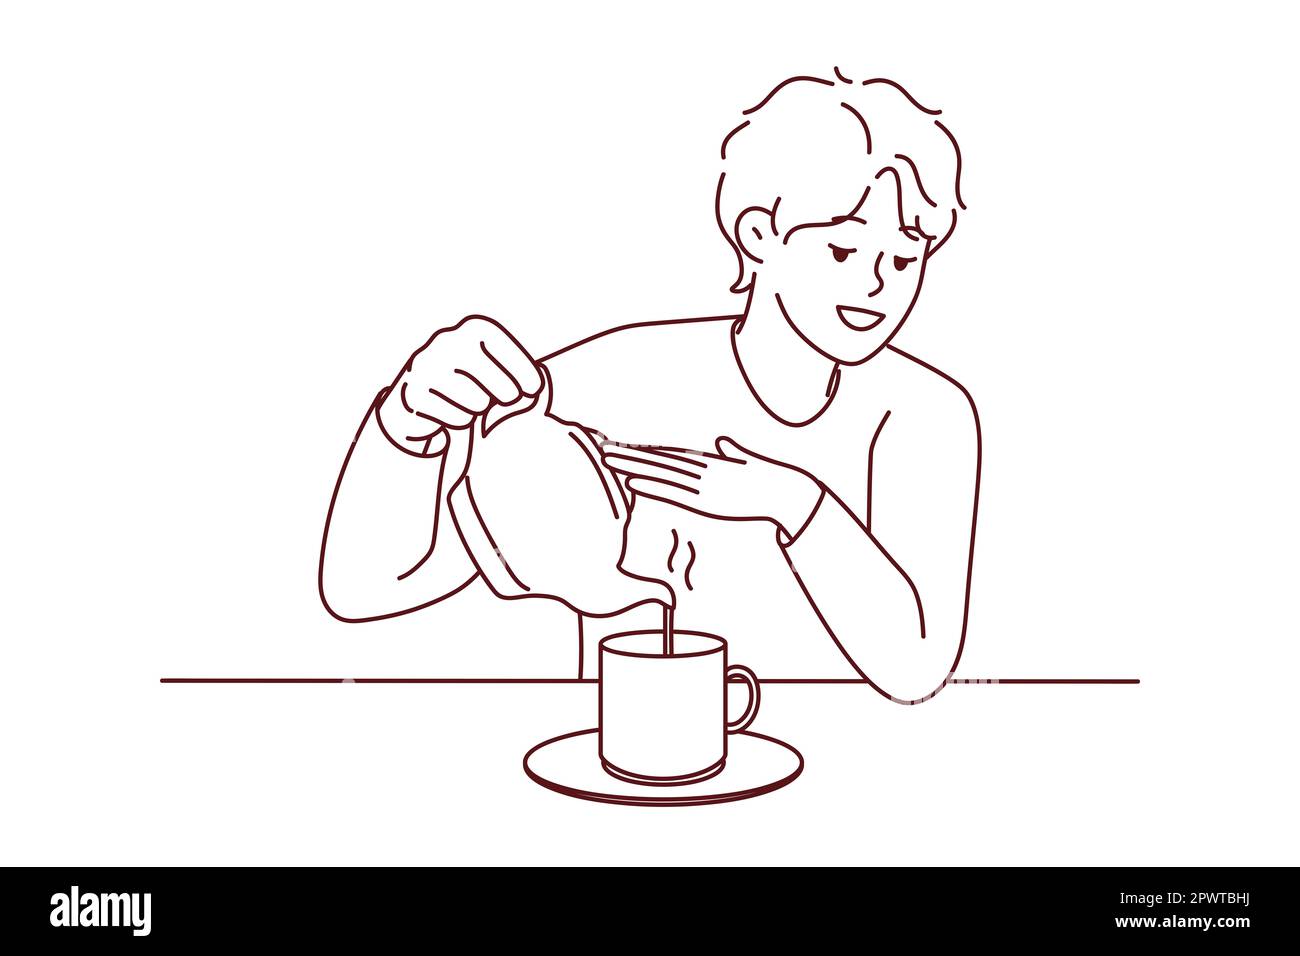 https://c8.alamy.com/comp/2PWTBHJ/young-man-sit-at-desk-pouring-tea-in-cup-from-kettle-smiling-guy-enjoy-warm-coffee-in-mug-at-home-vector-illustration-2PWTBHJ.jpg